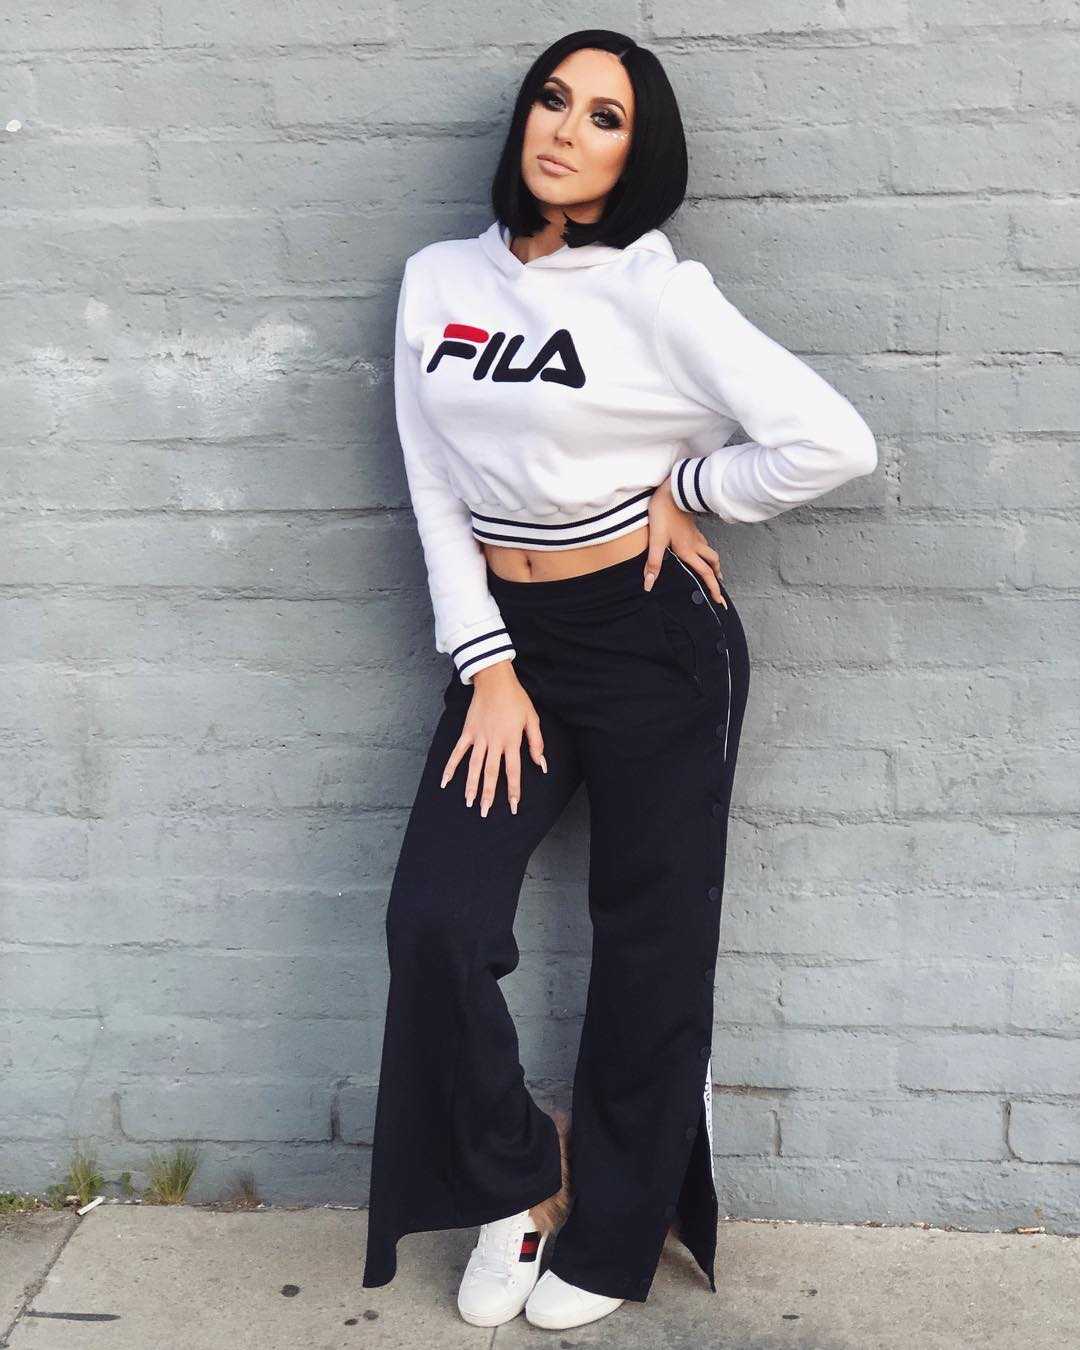 51 Hottest Jaclyn Hill Big Butt Pictures That Are Basically Flawless 69